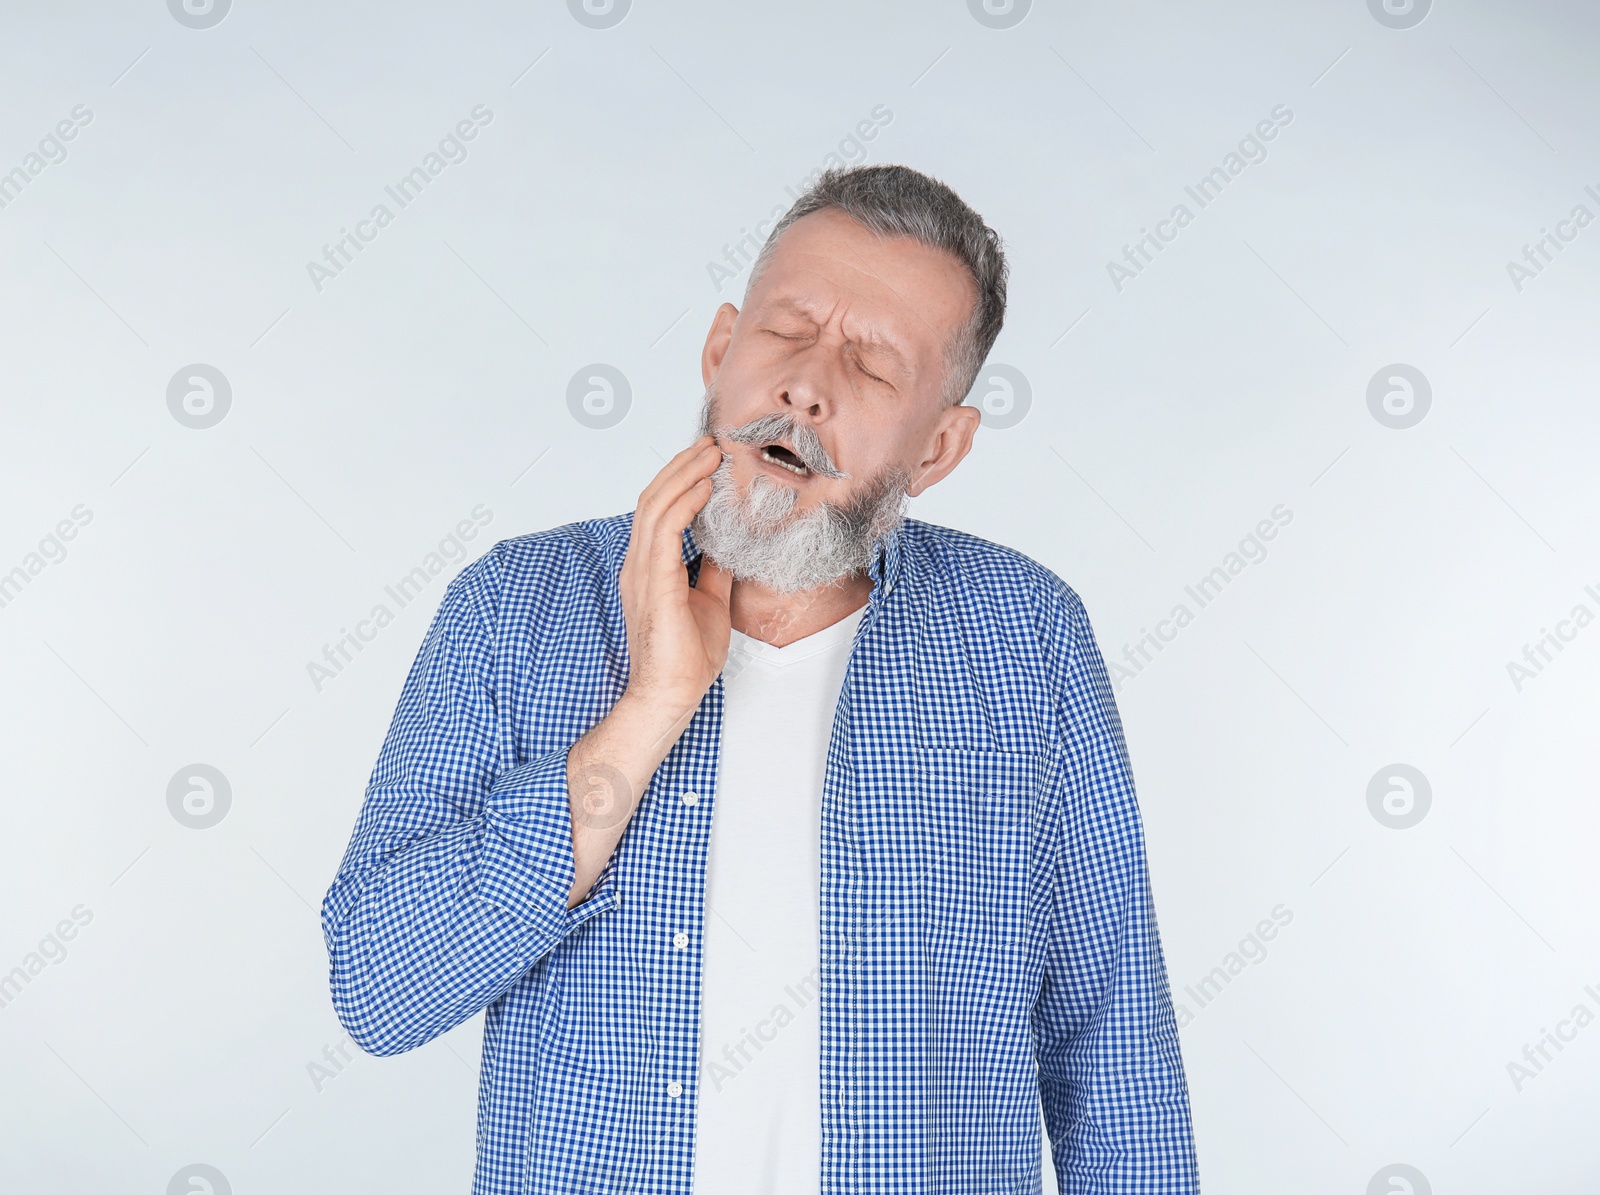 Photo of Man suffering from toothache on light background